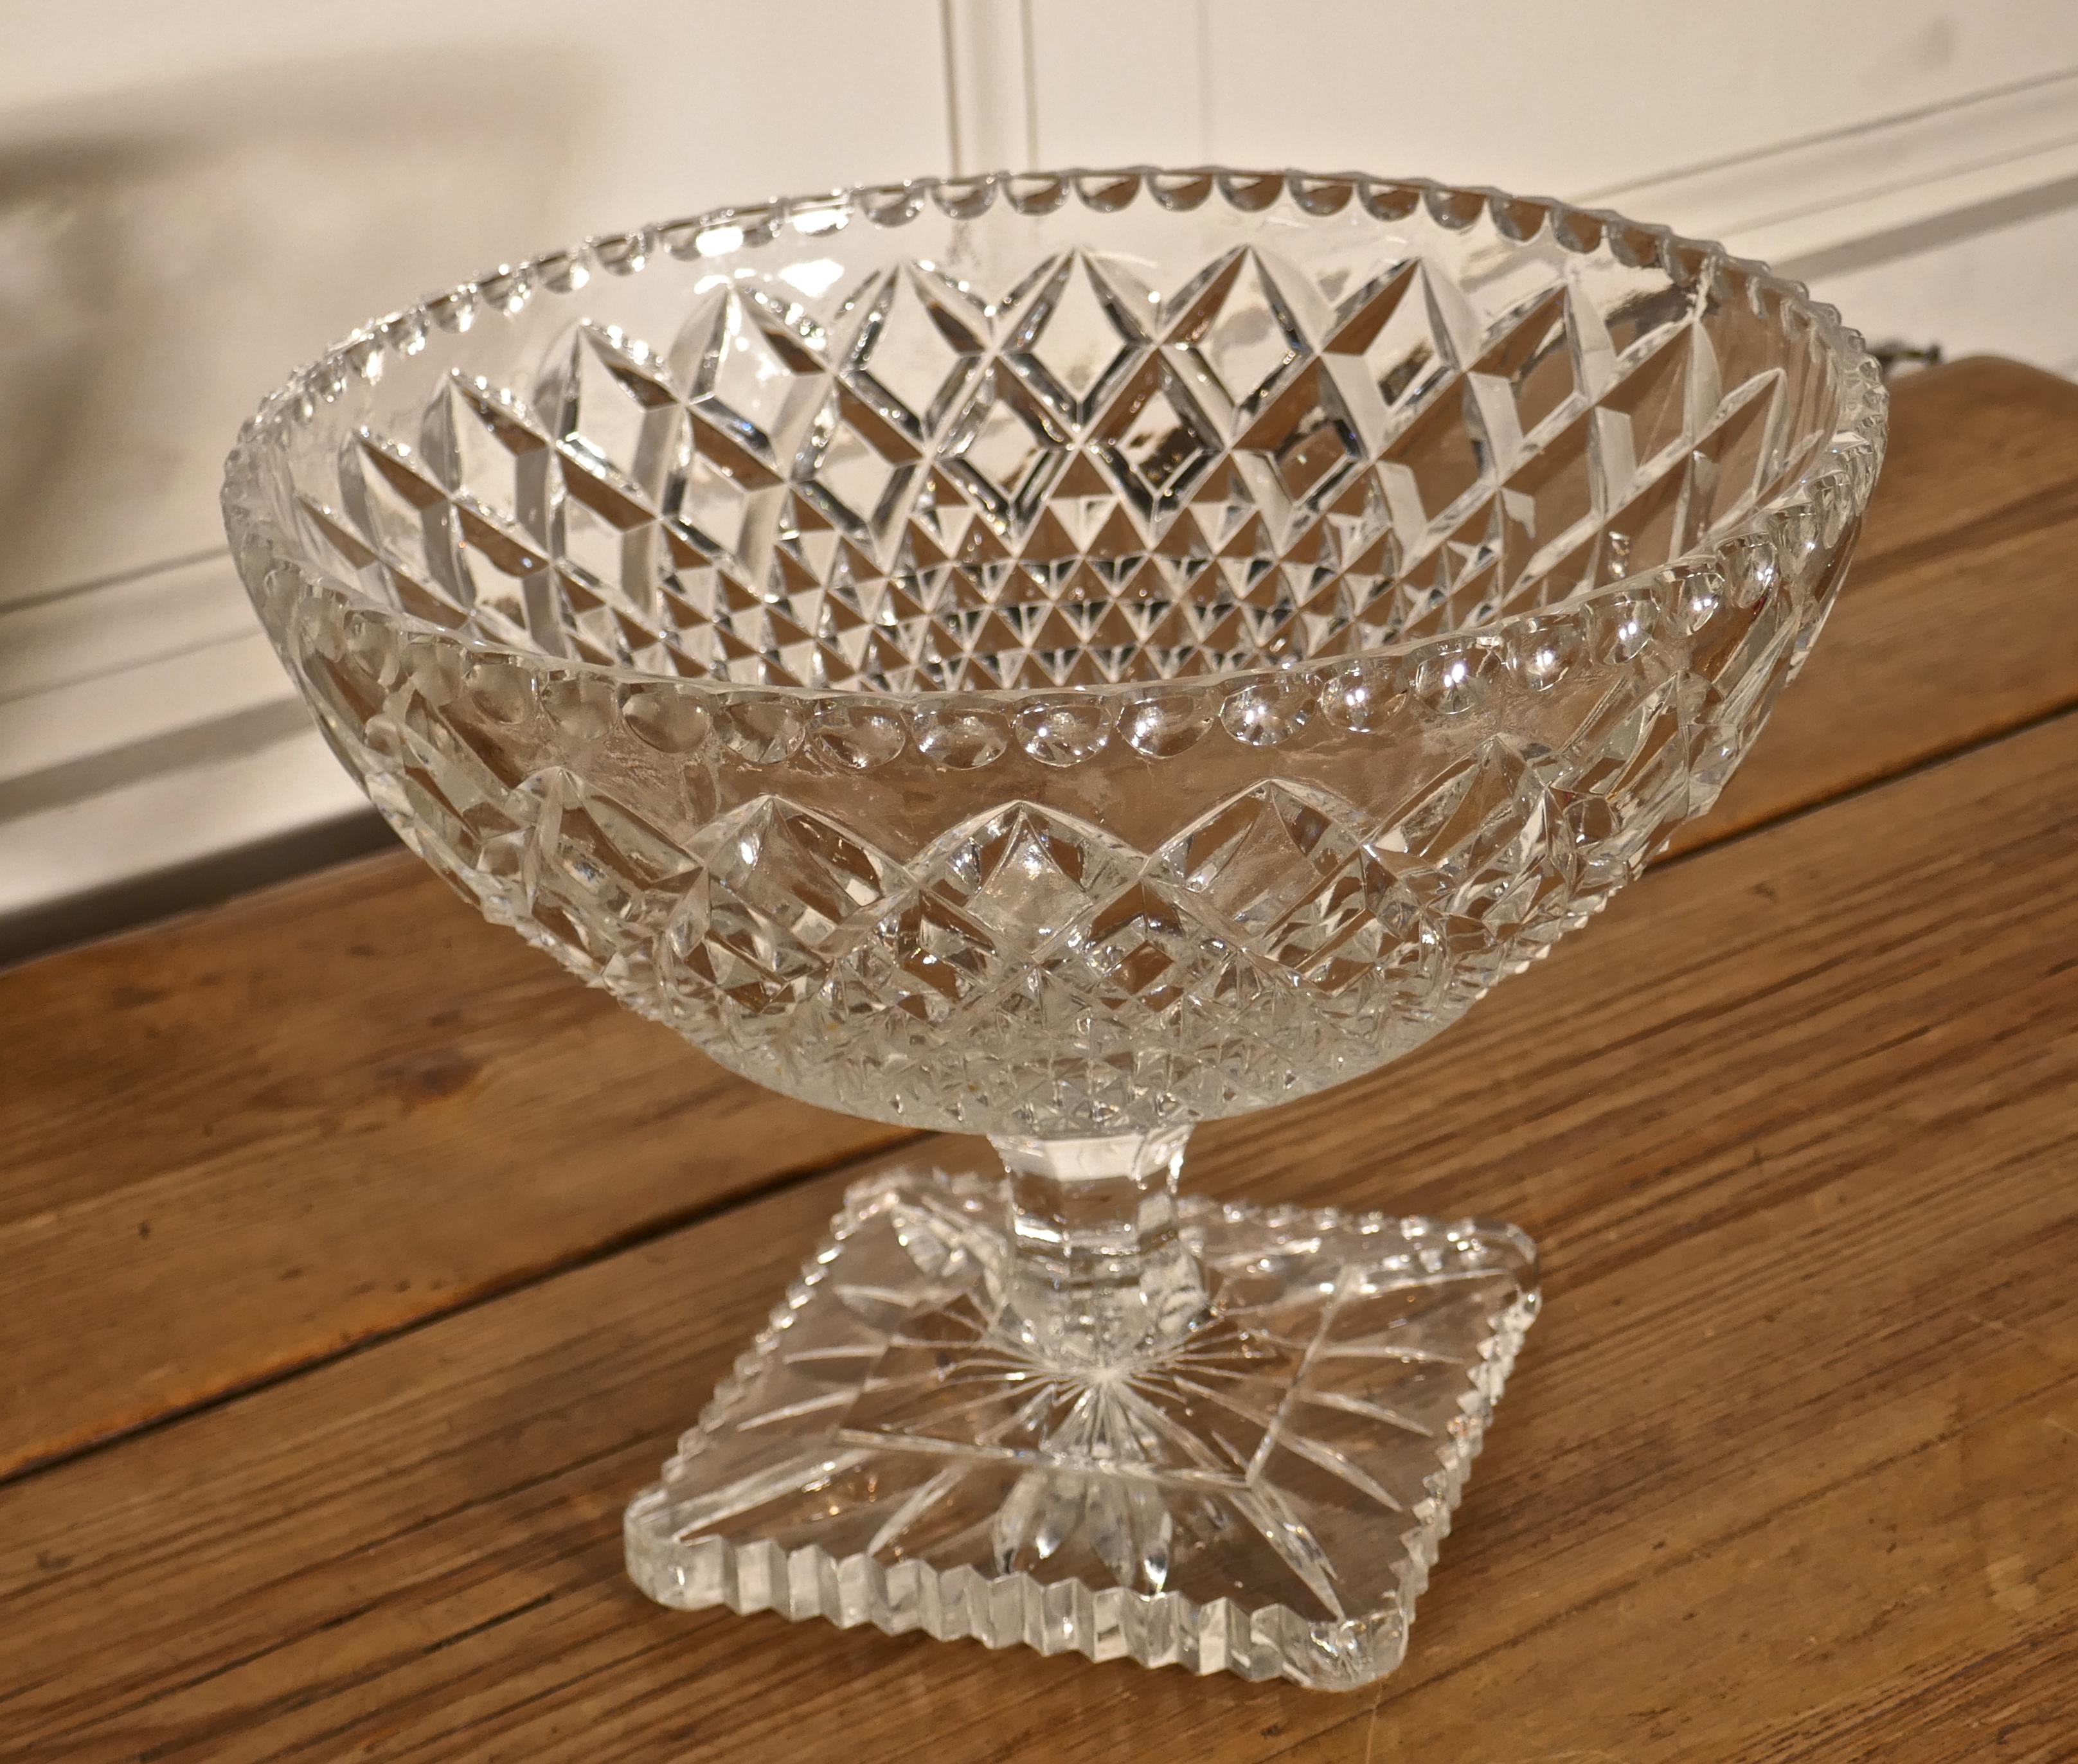 French Provincial Large French Tazza Diamond Cut Cristal Pedestal Fruit Dish For Sale